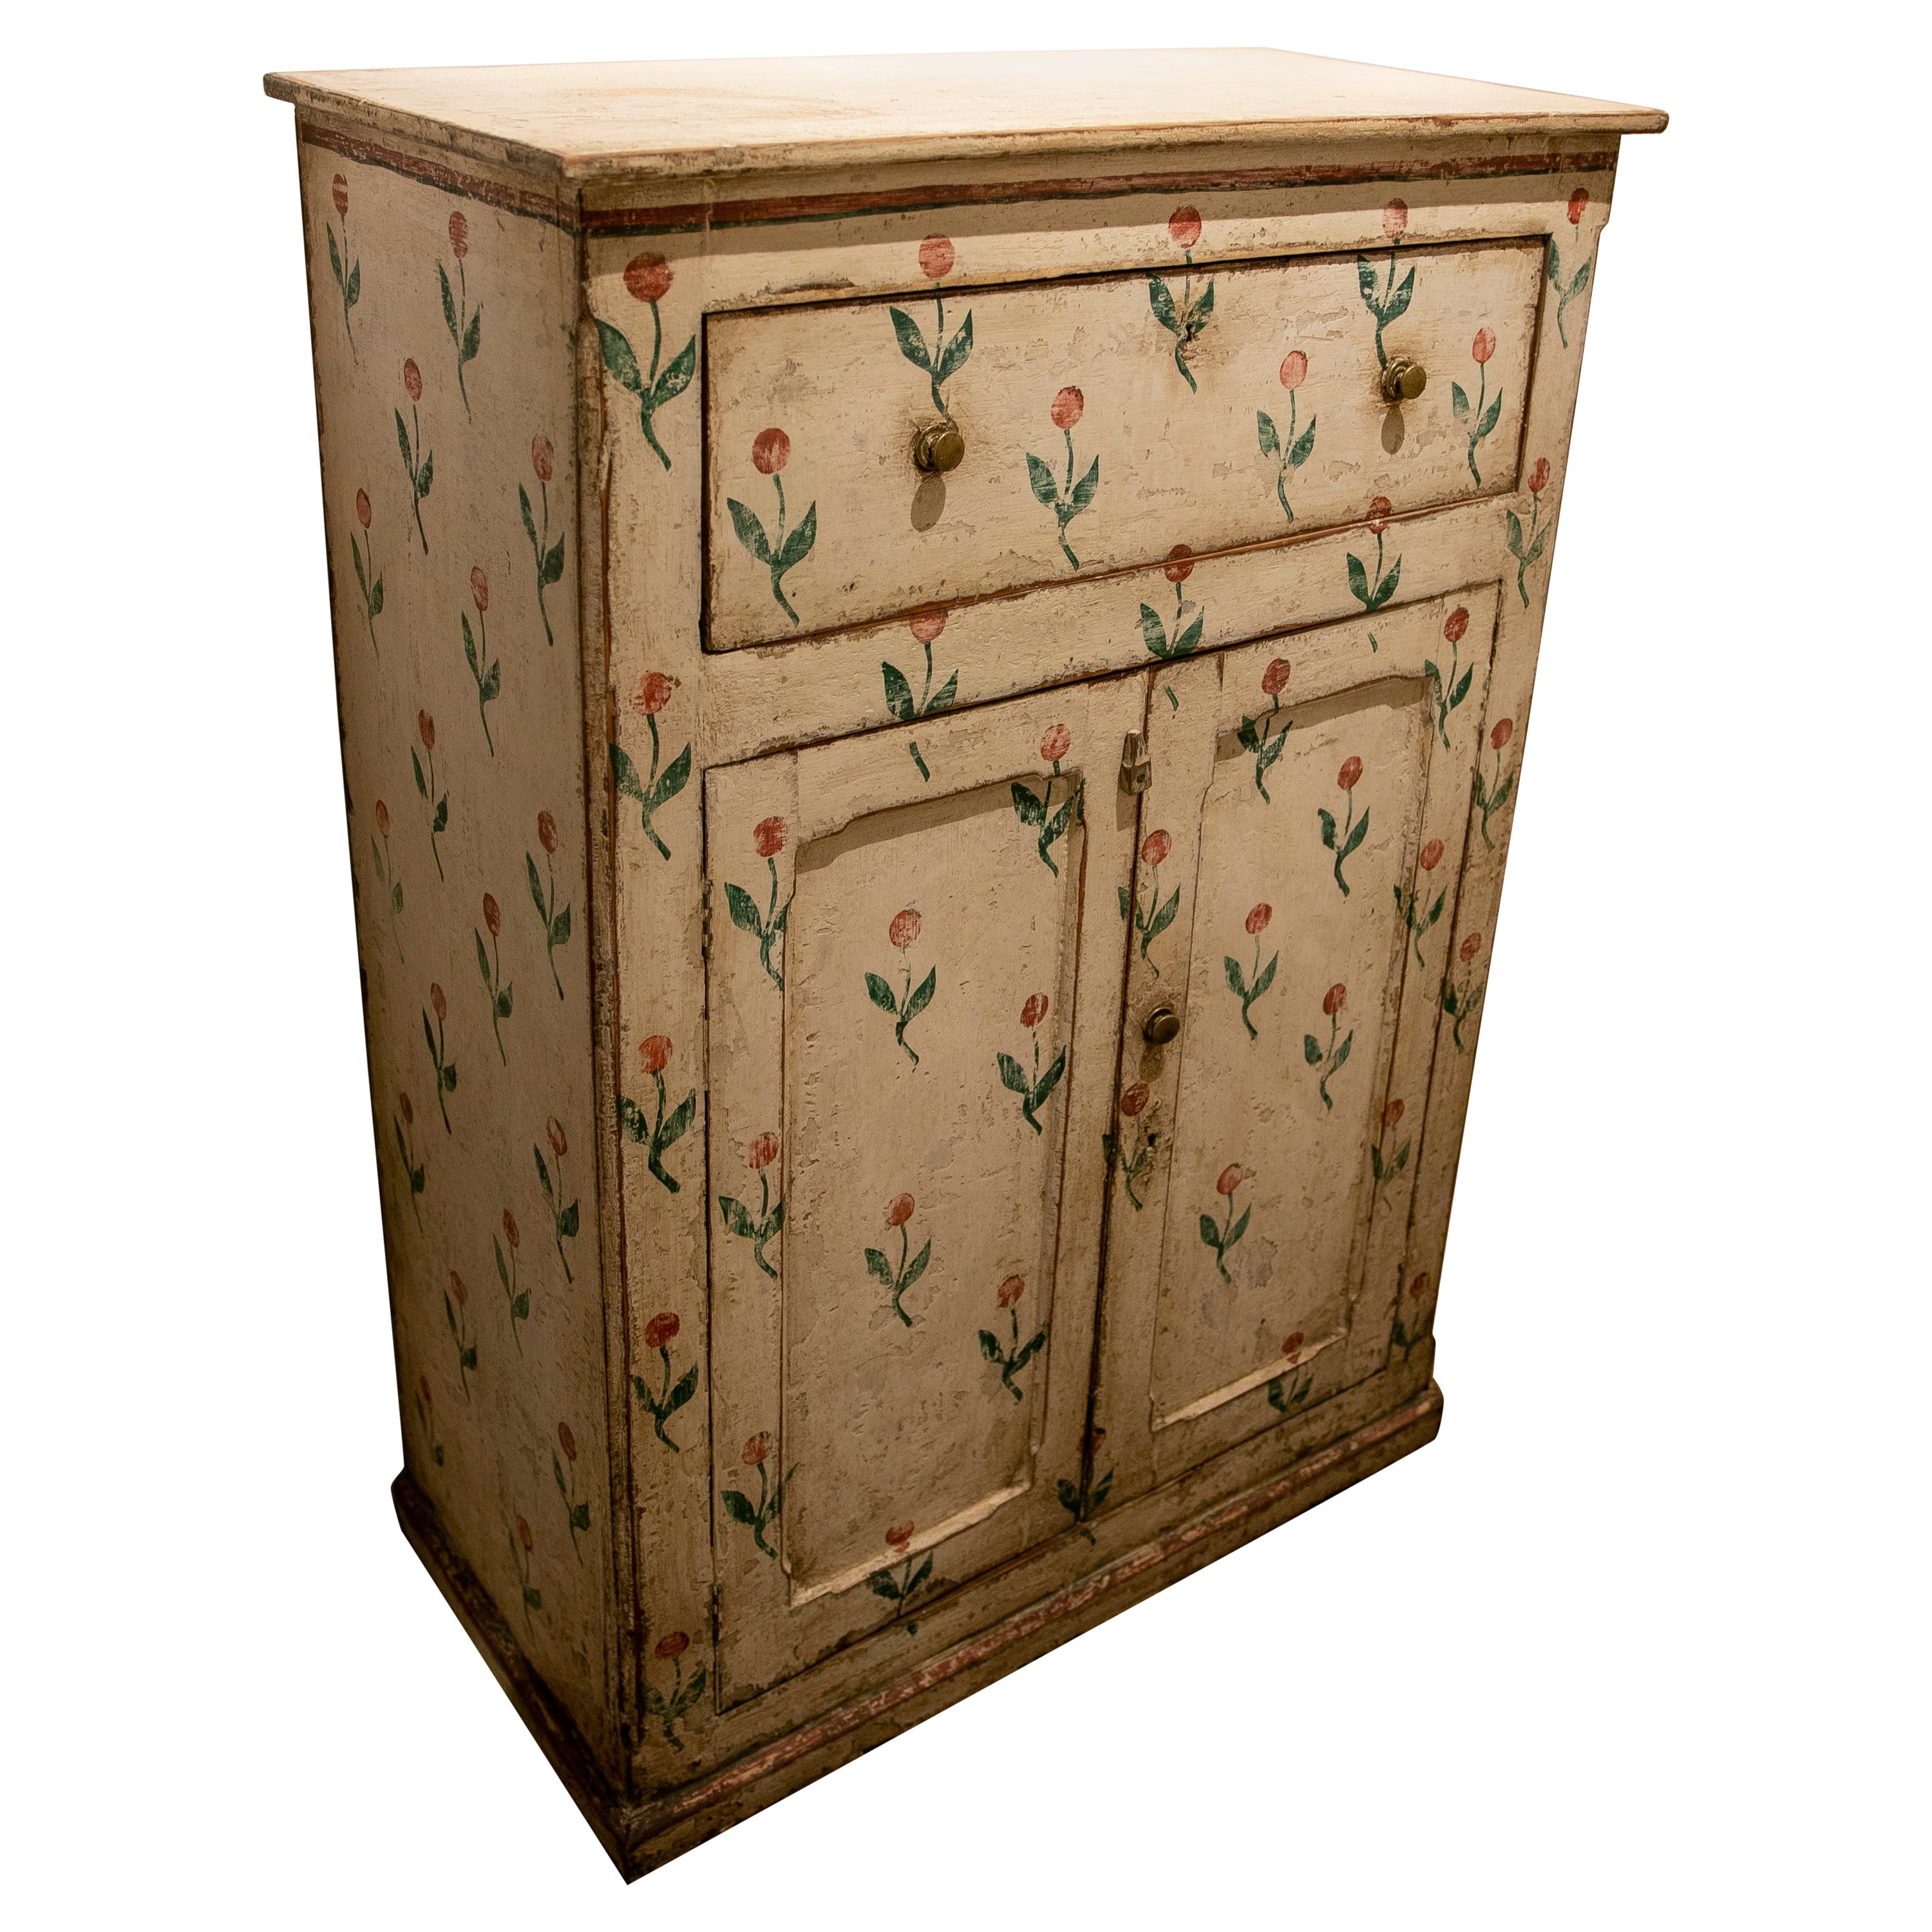 Spanish Hand-Painted Wooden Cabinet with Drawer and Doors with Flowers